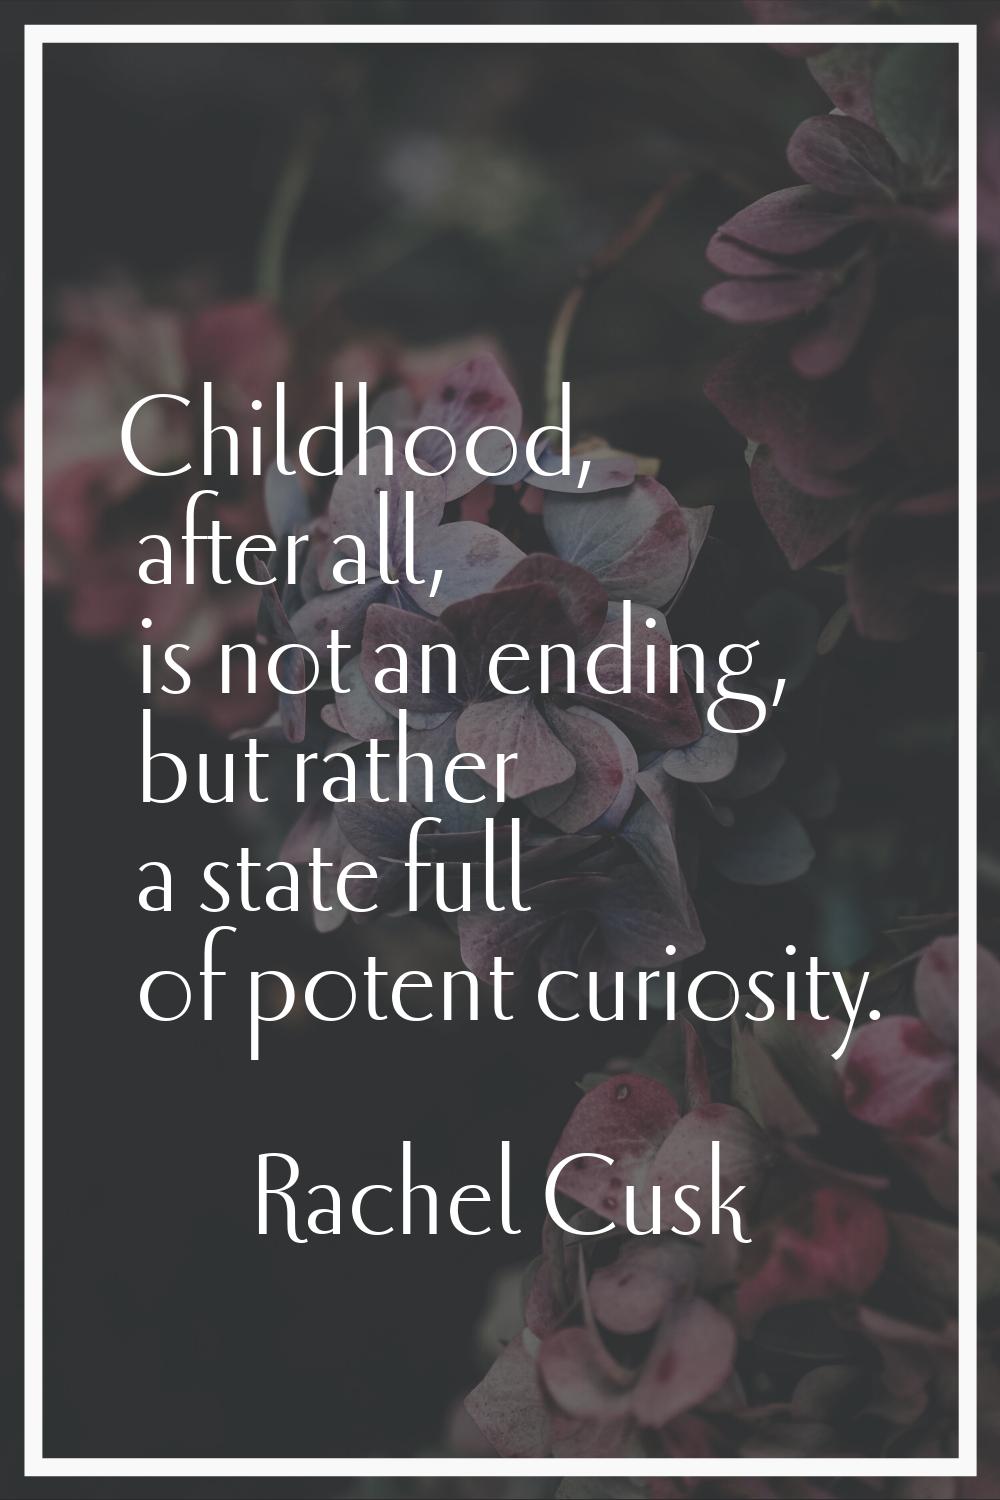 Childhood, after all, is not an ending, but rather a state full of potent curiosity.